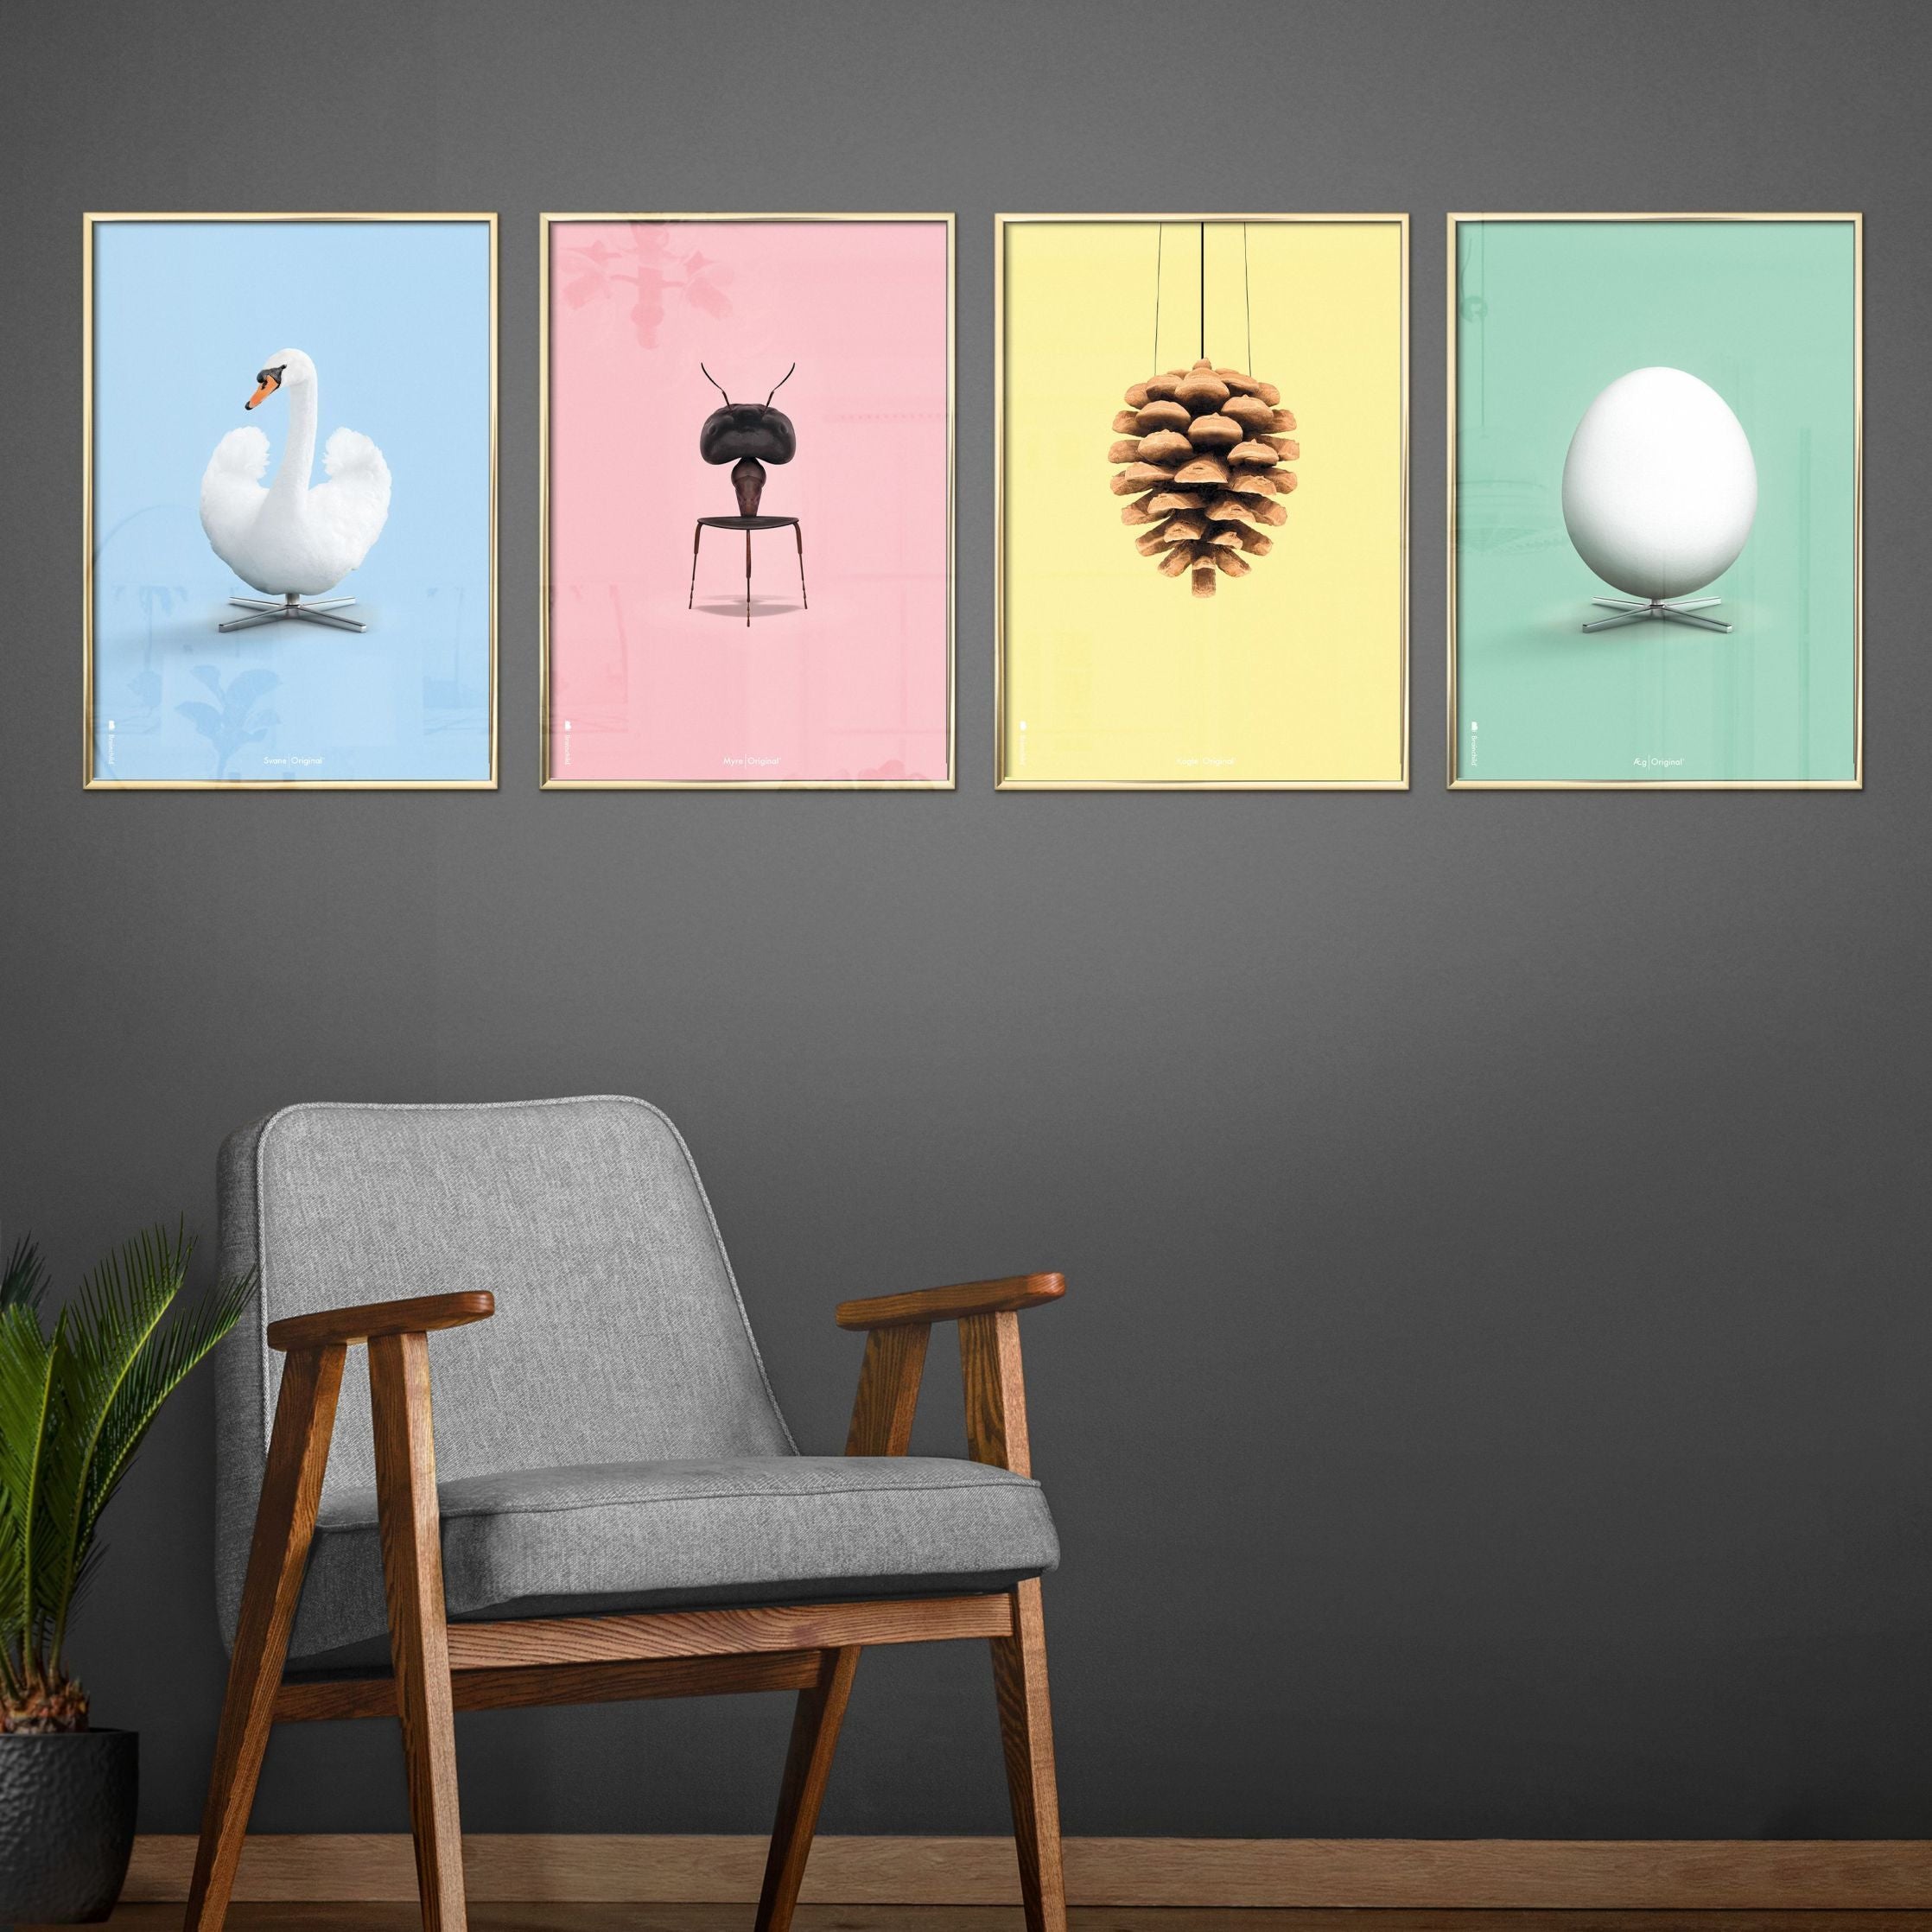 Brainchild Egg Classic Poster, Frame In Black Lacquered Wood 50x70 Cm, Mint Green Background